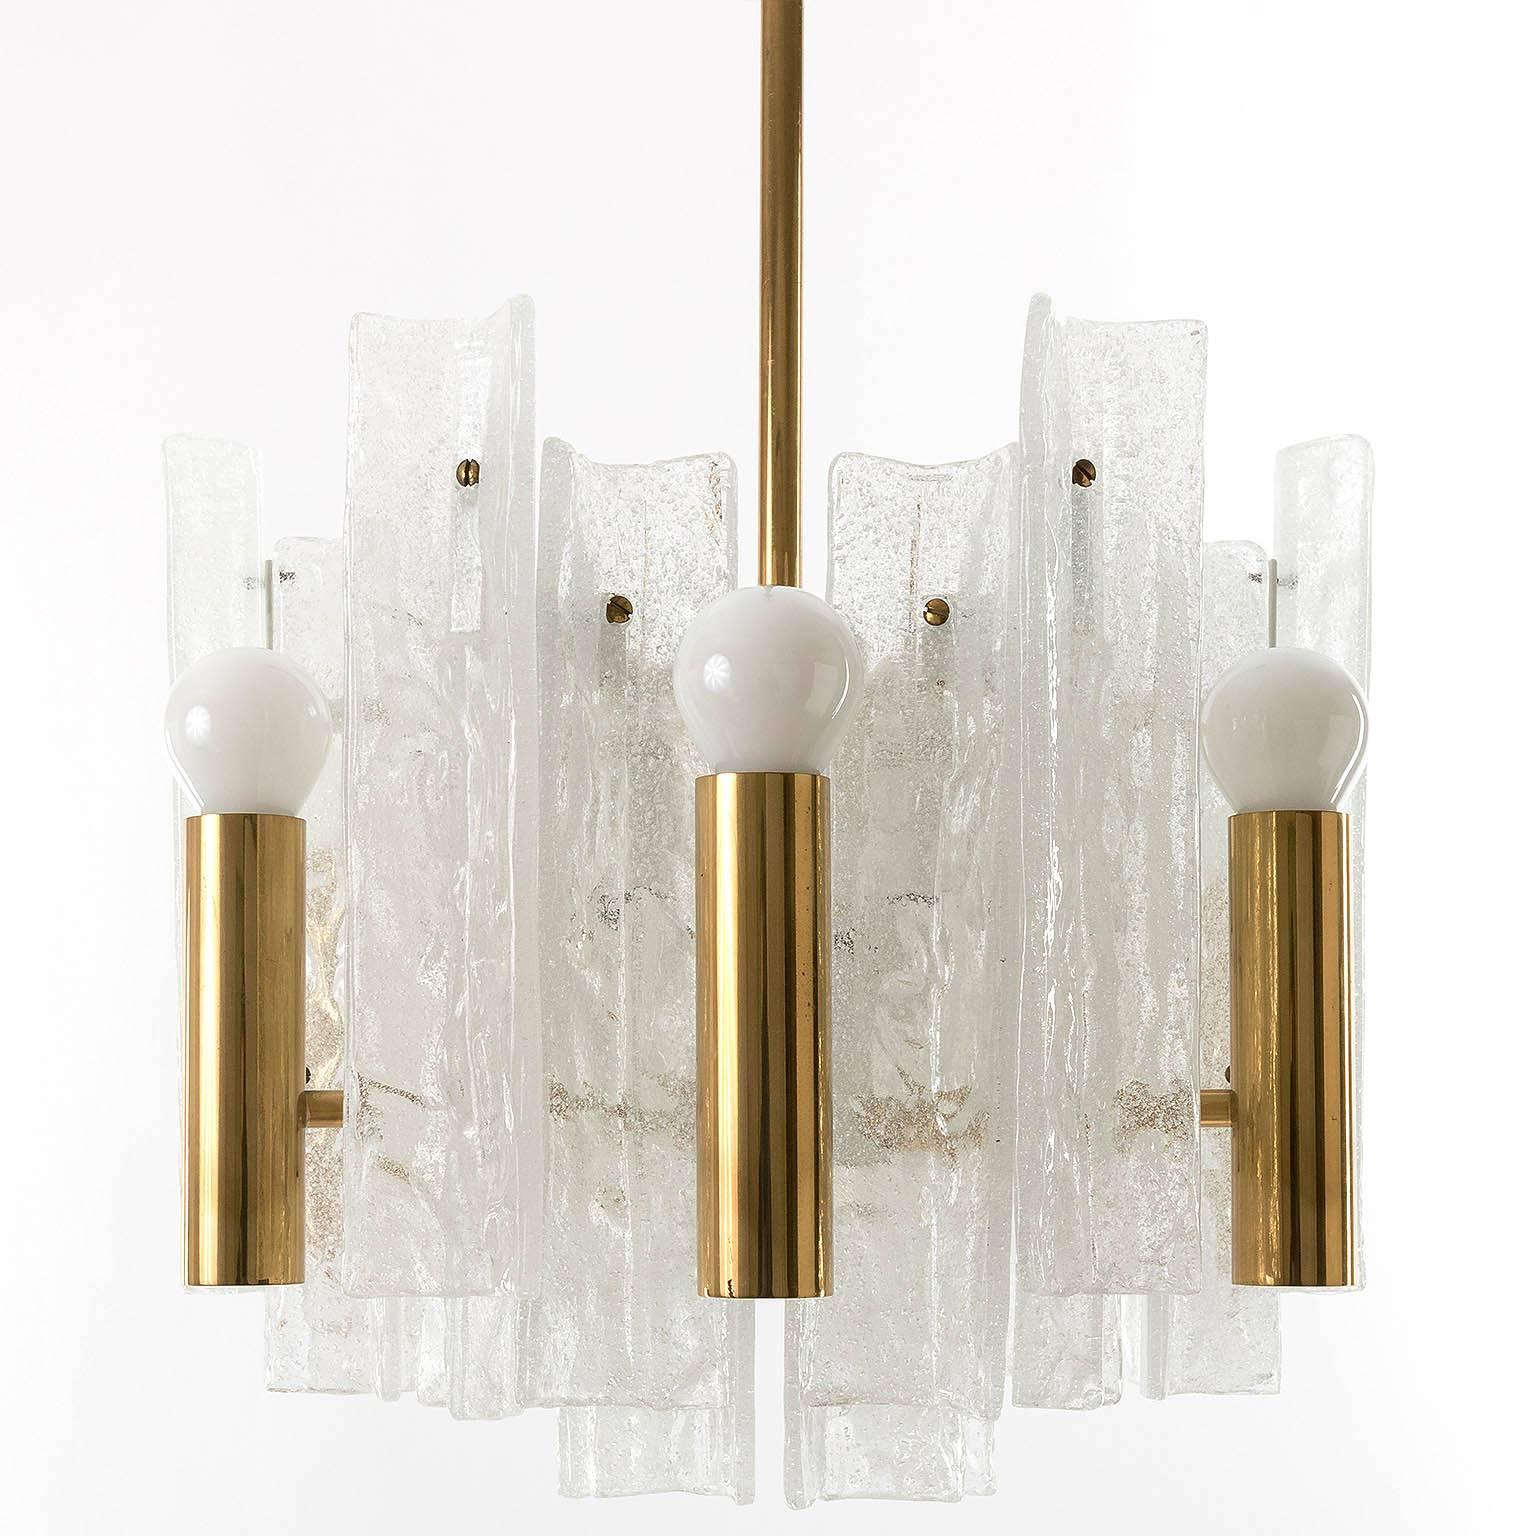 Beautiful chandelier made of brass and textured foamglass by Kalmar. Twelve small base bulbs (six upwards and six downwards directed). Works well with different kind of bulbs (clear, frosted or half gold mirror bulbs).

Measures: Diameter 14.2 in